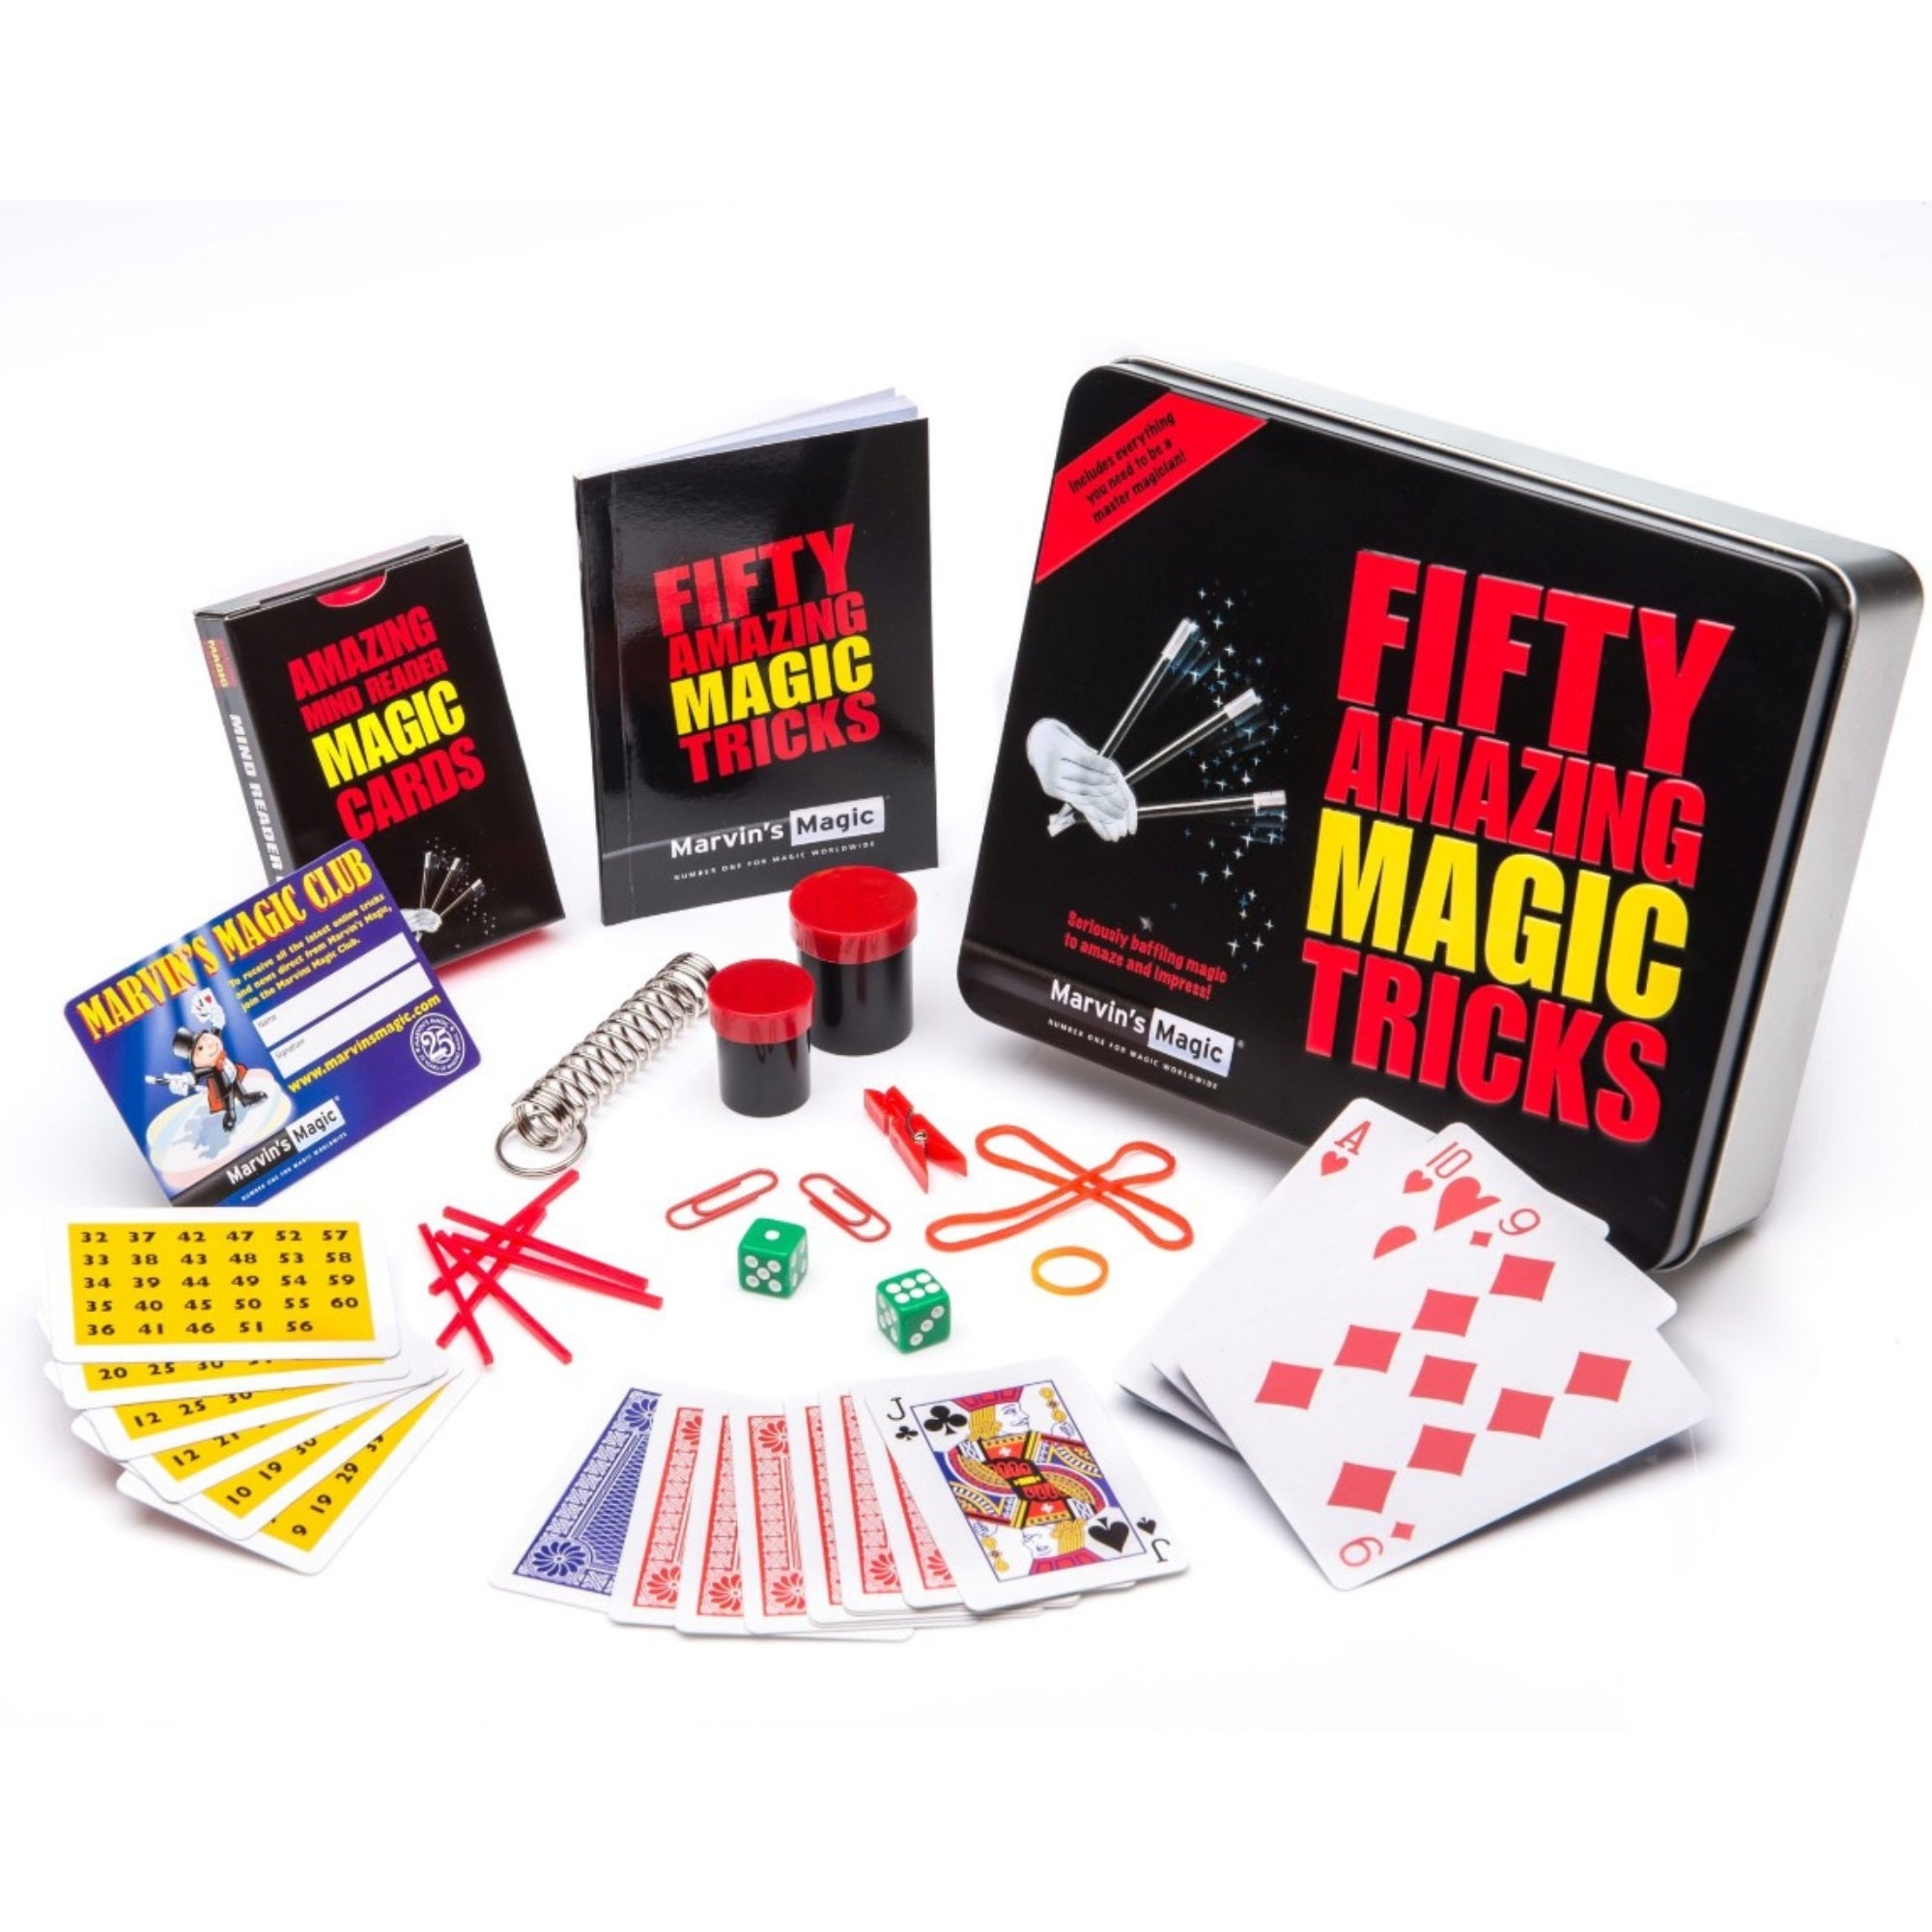 magic tricks tin and contents spread out